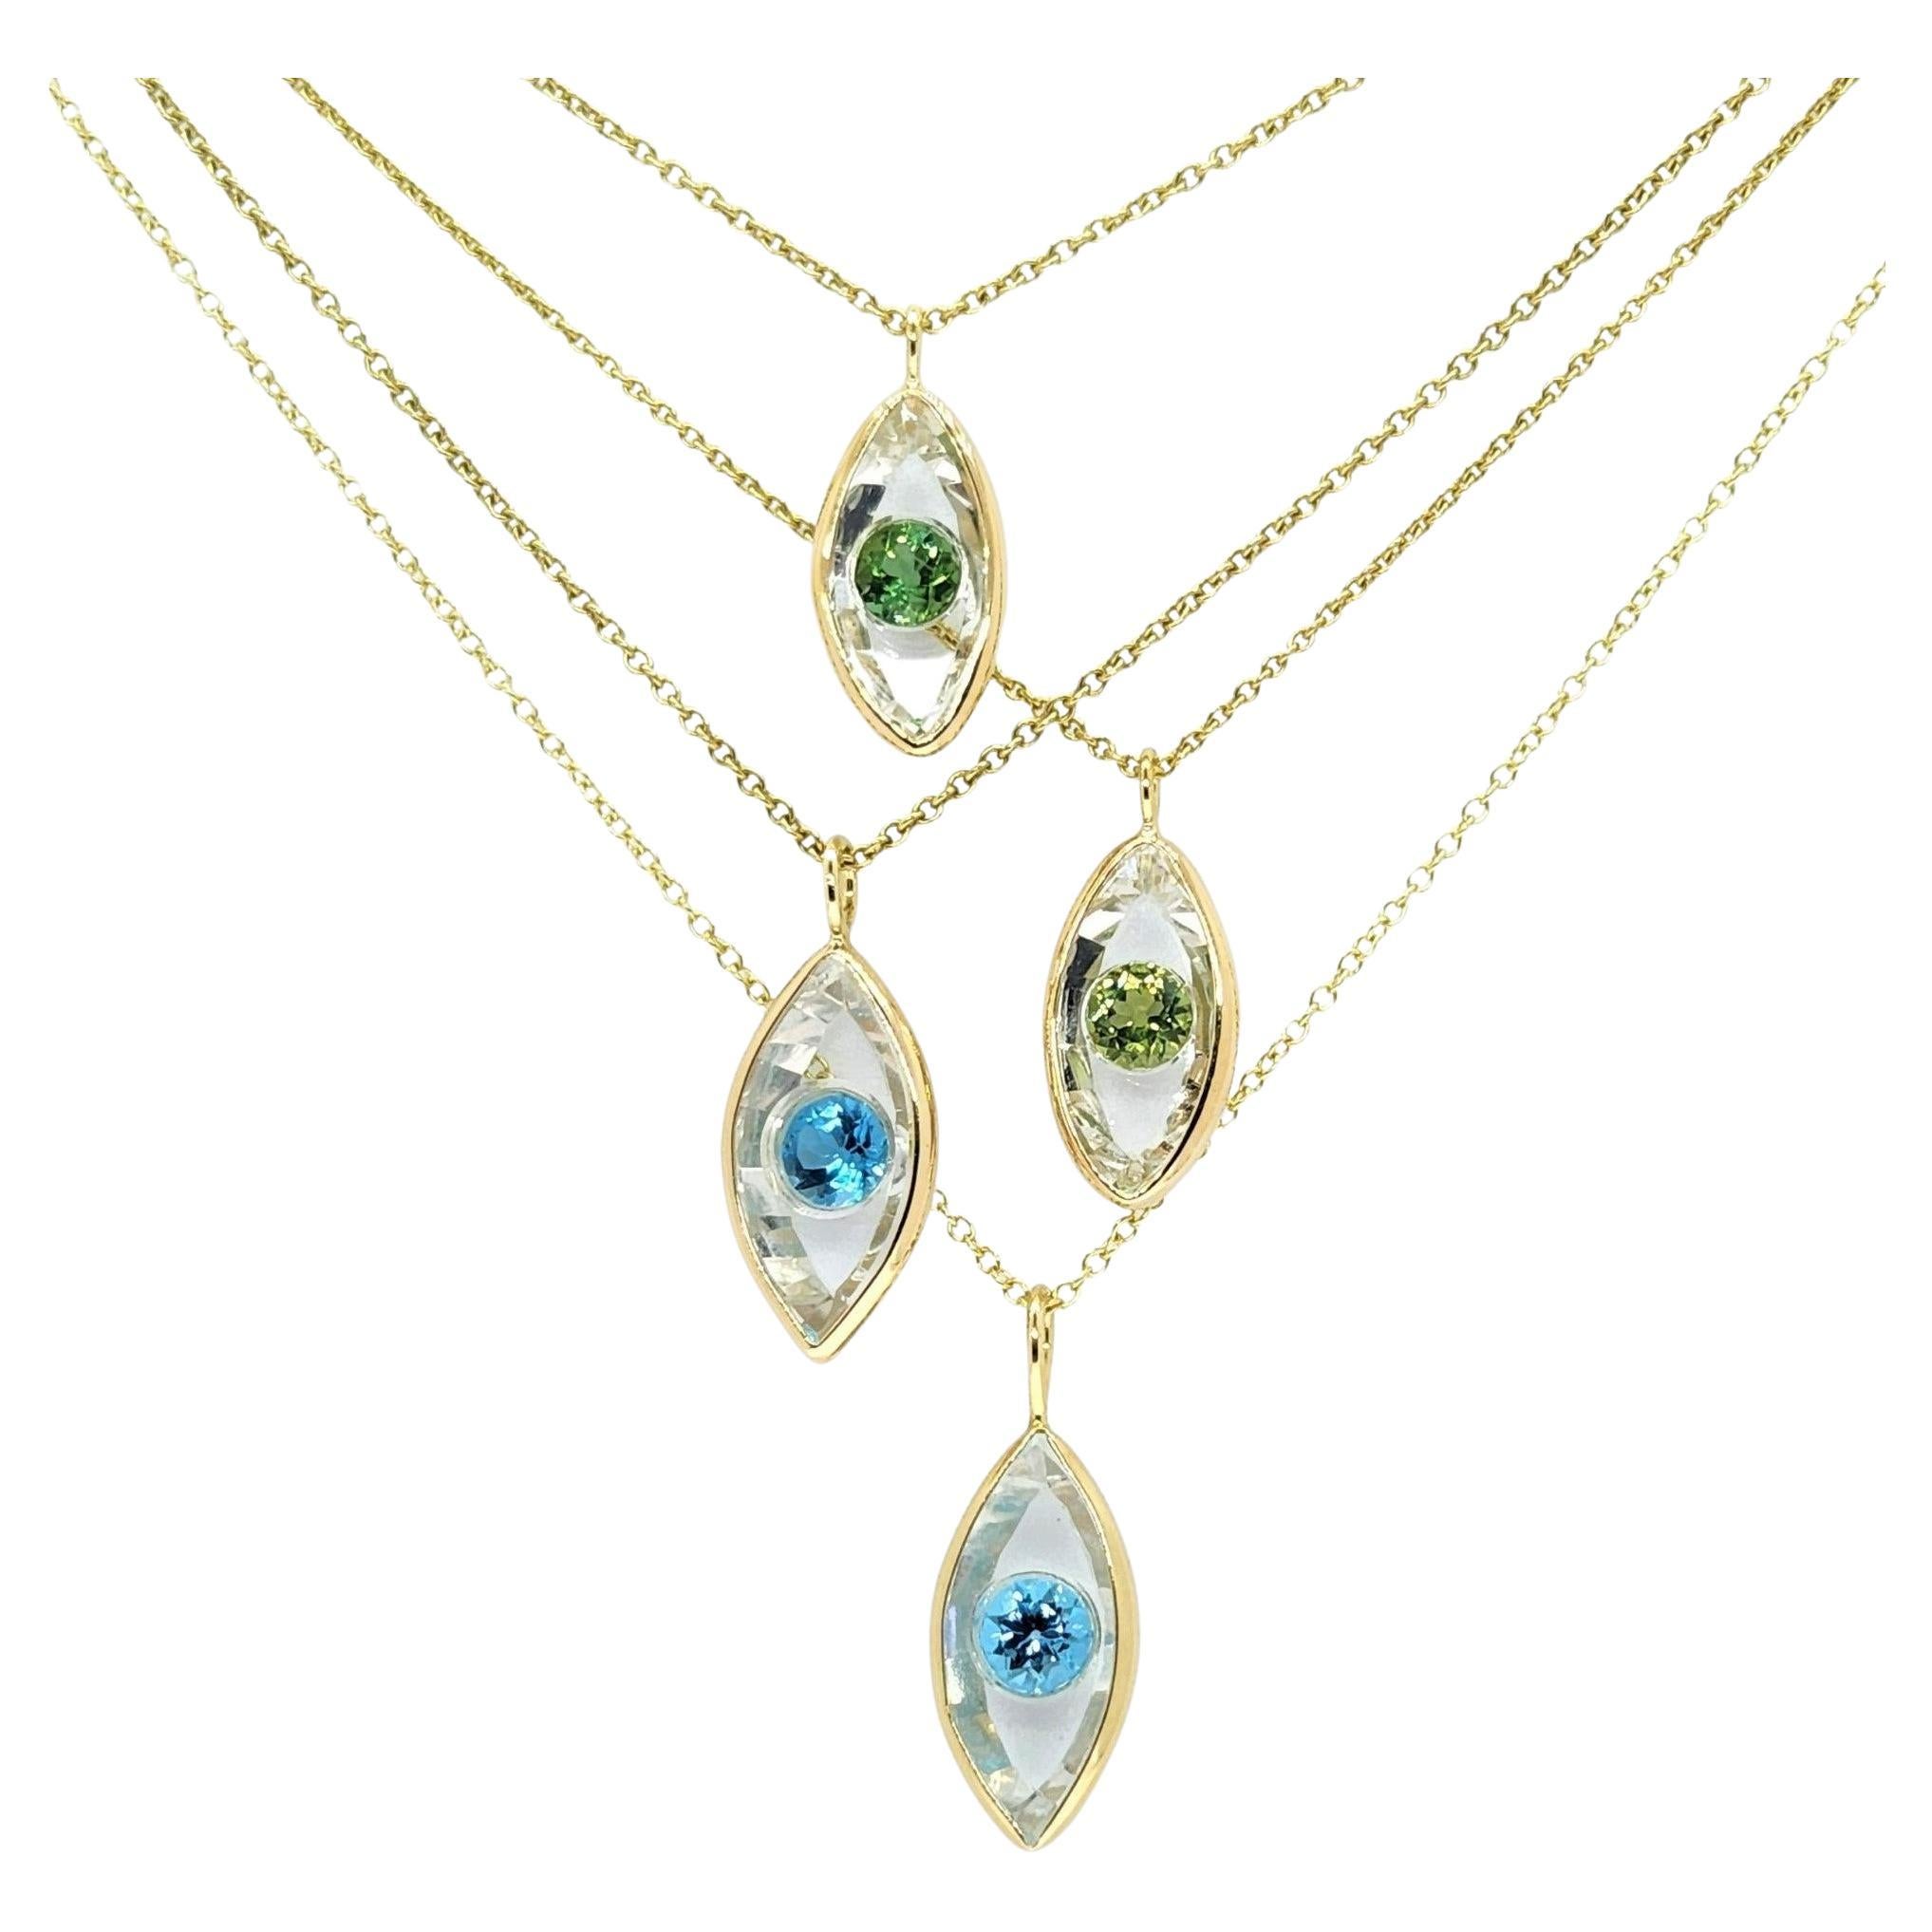 Protective Evil Eye Necklace in 14K Gold and Quartz with Blue Topaz or Peridot